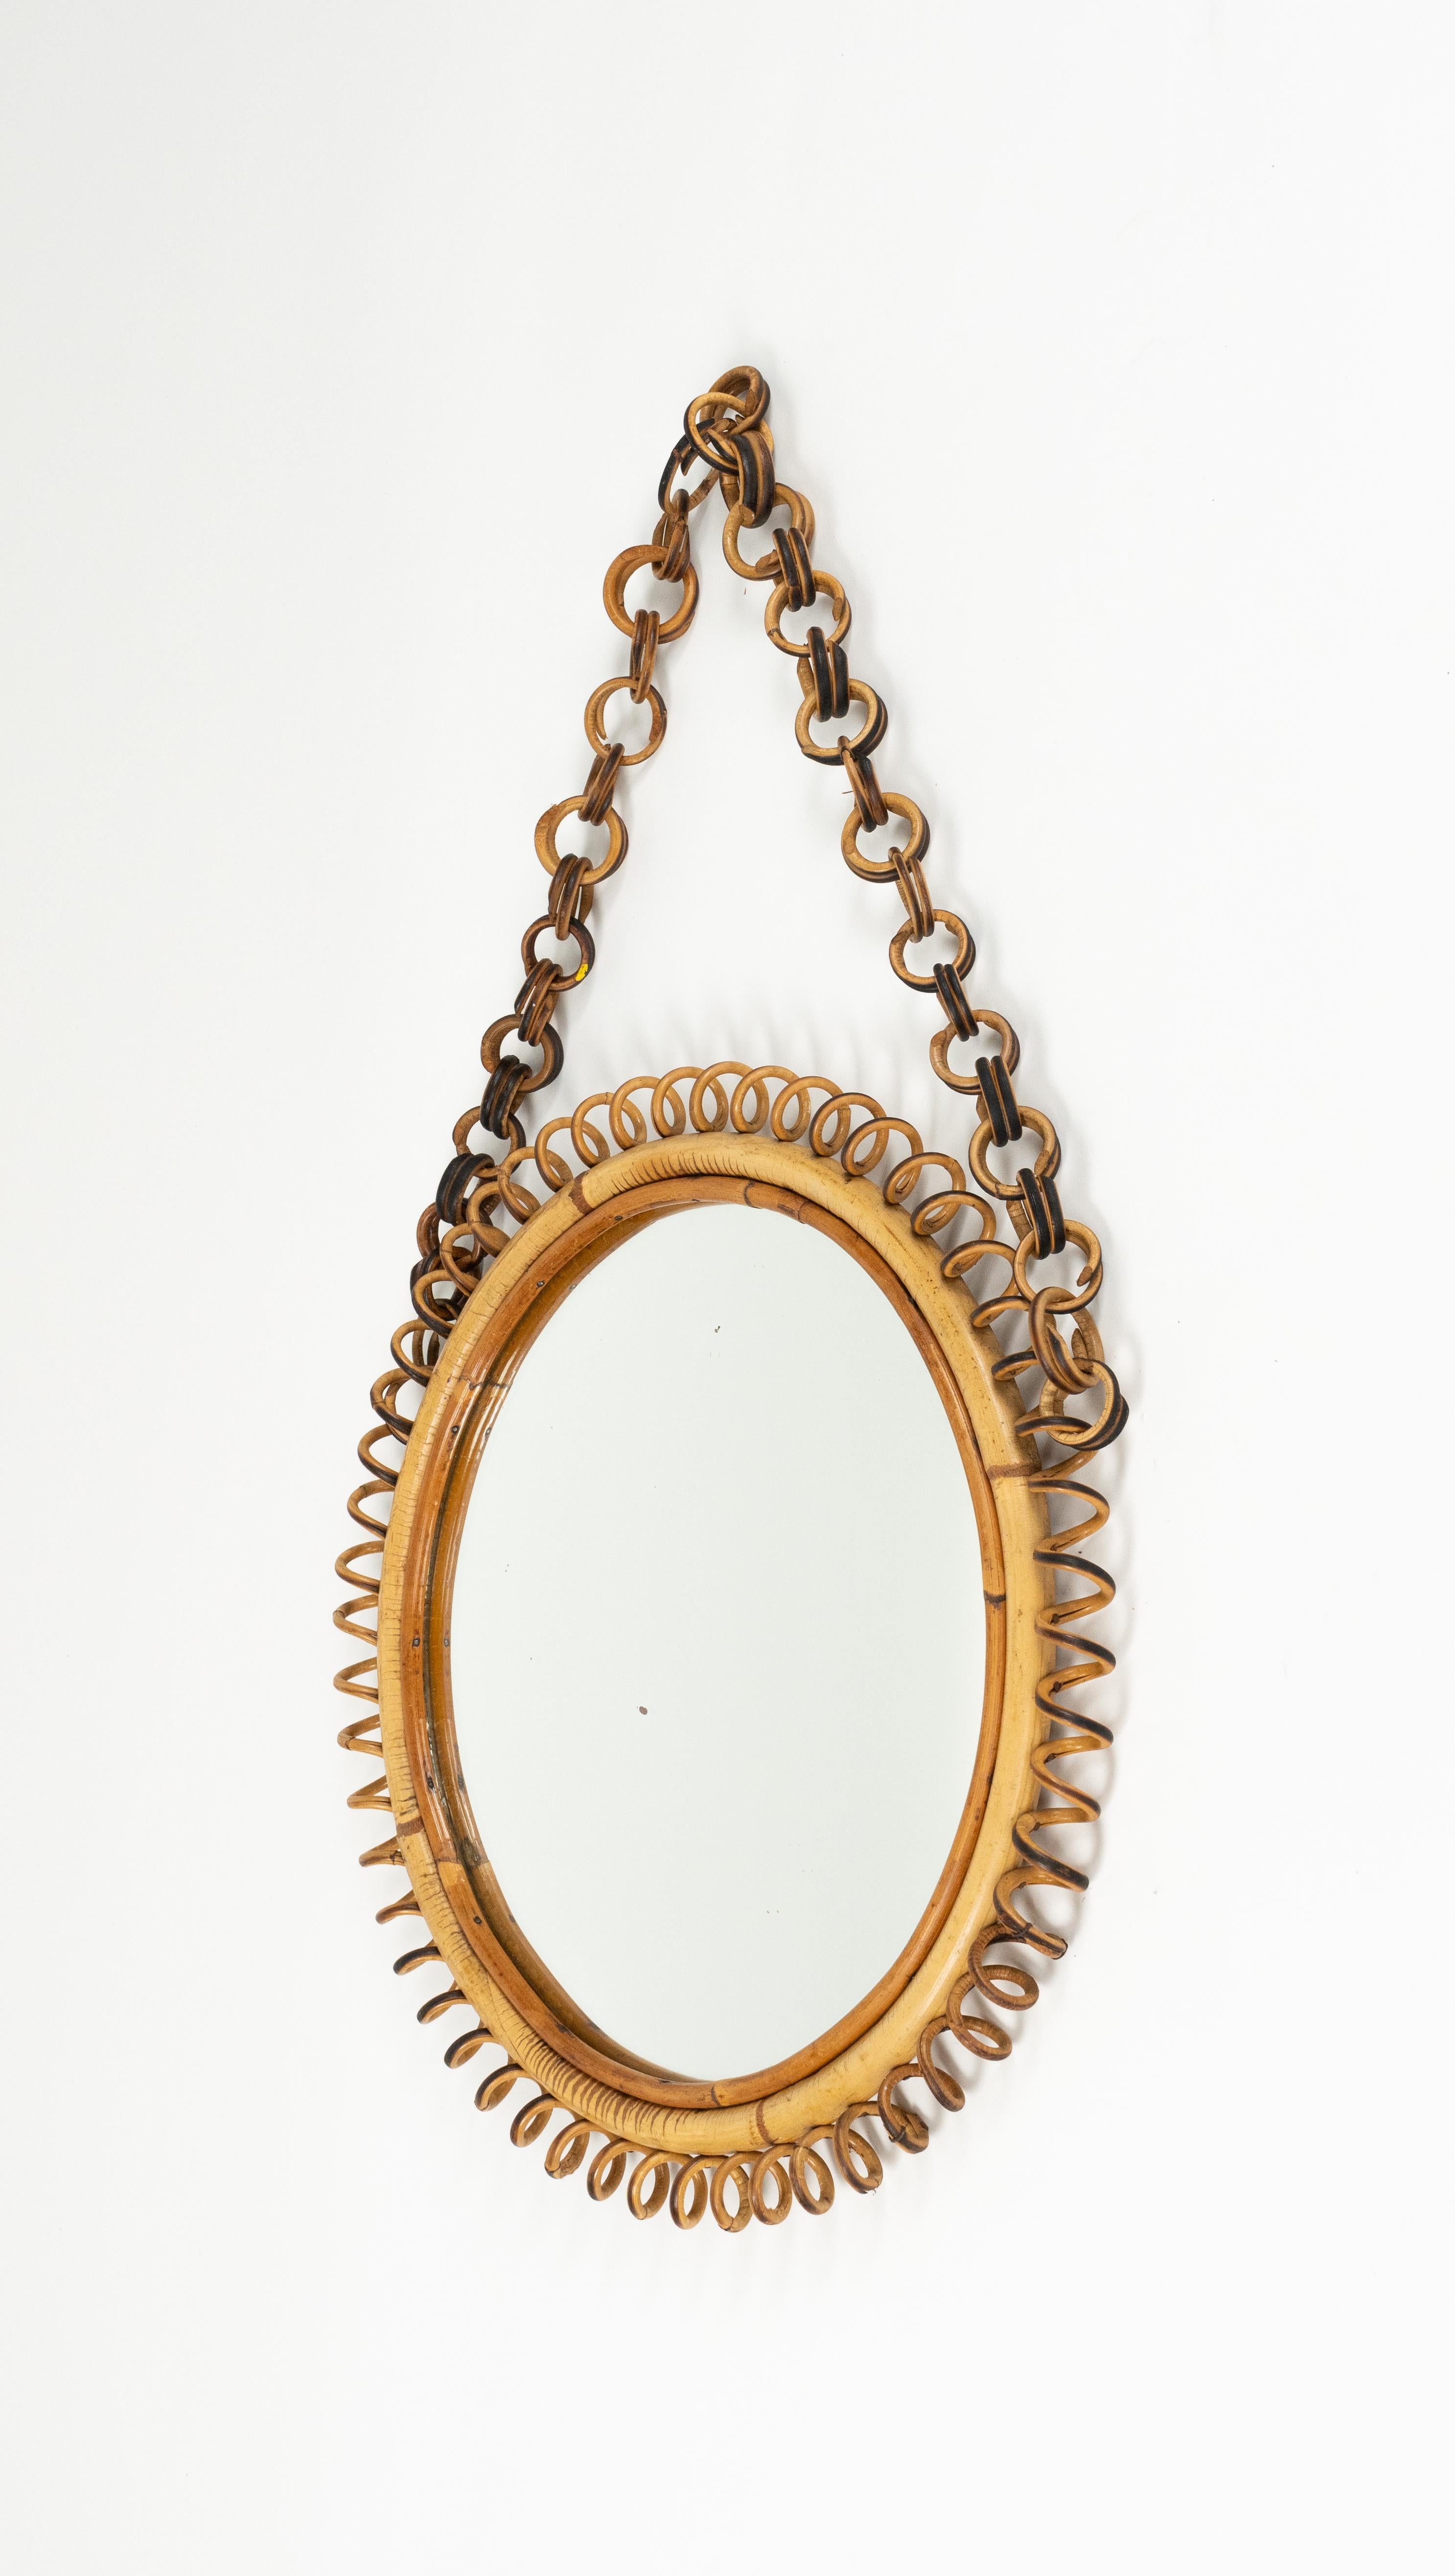 Midcentury Rattan and Bamboo Round Wall Mirror with Chain, Italy 1960s For Sale 3